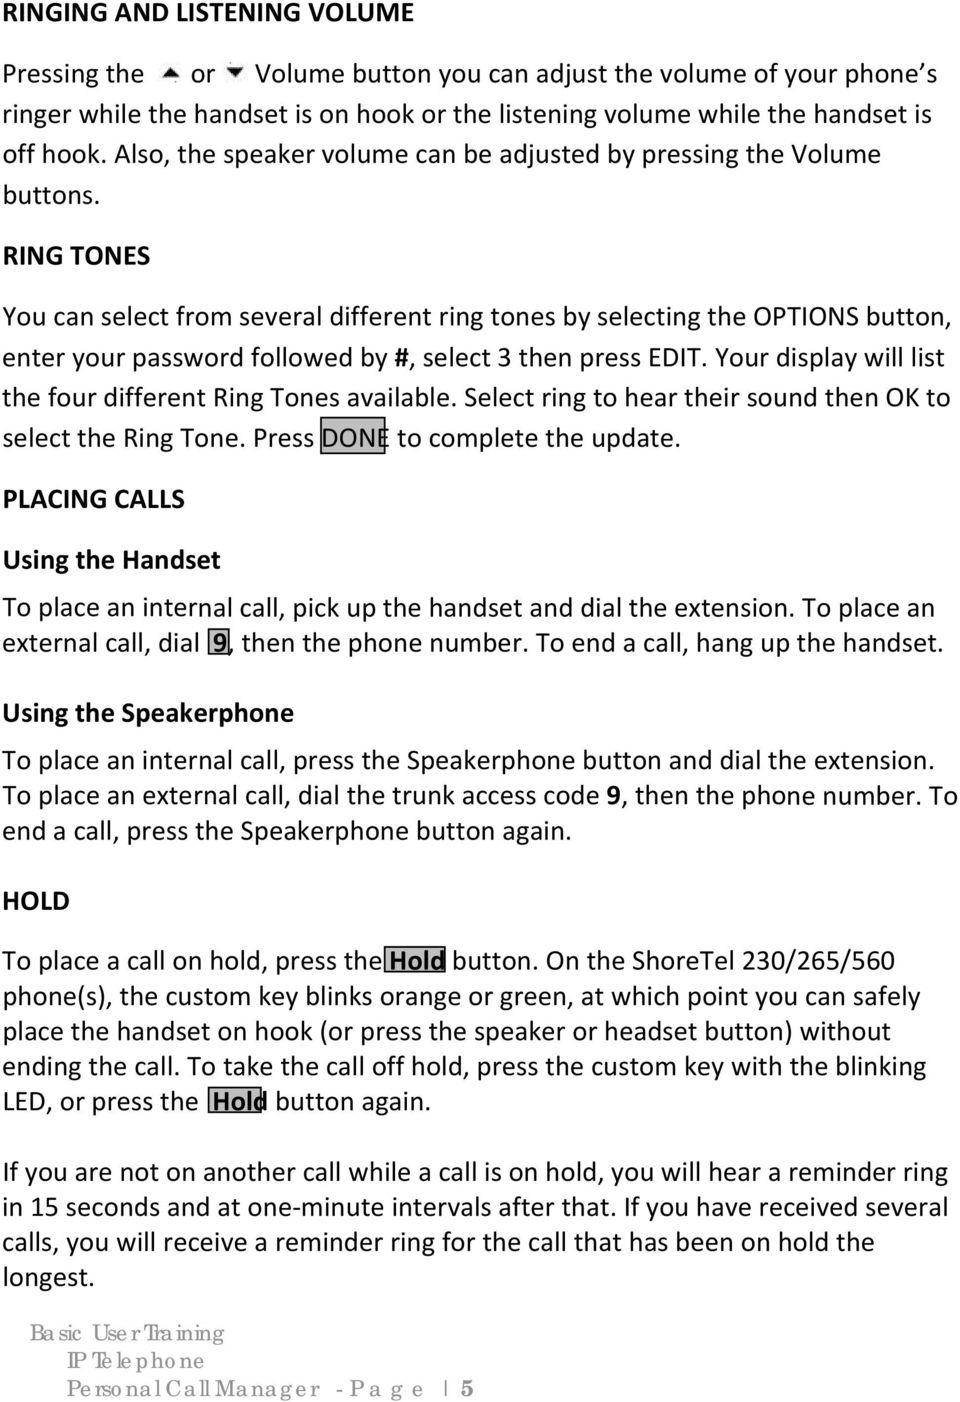 RING TONES You can select from several different ring tones by selecting the OPTIONS button, enter your password followed by #, select 3 then press EDIT.